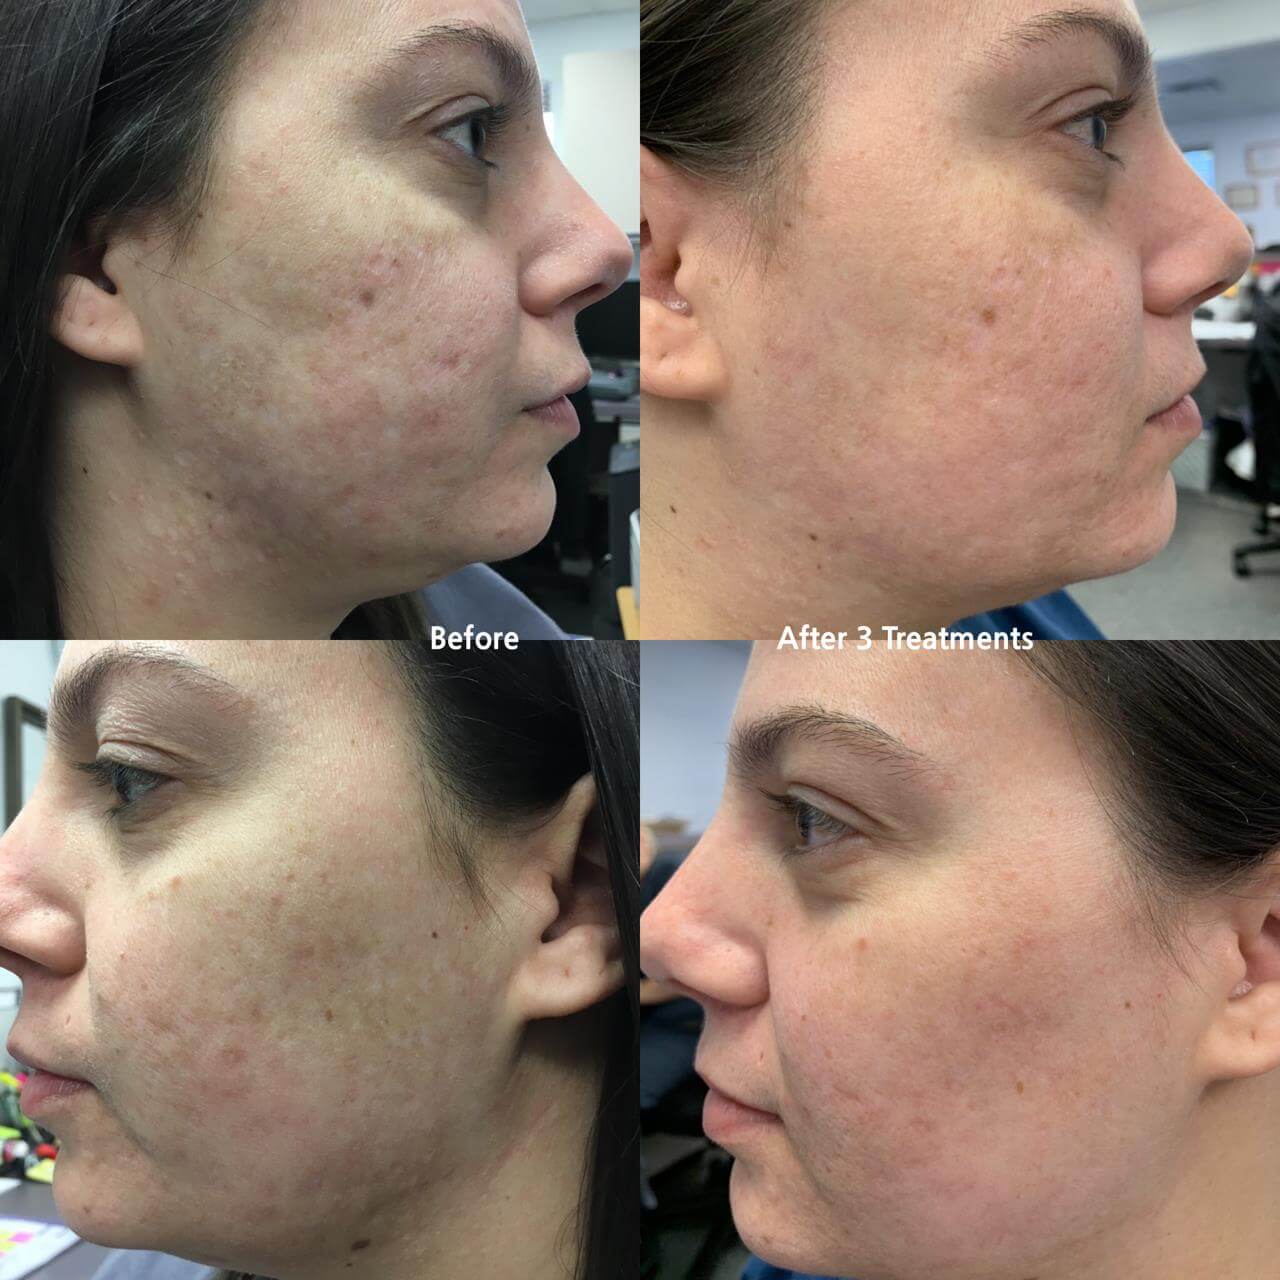 Before and After photos of Fractional RF with Pixel8 Skin Tightening treatment.